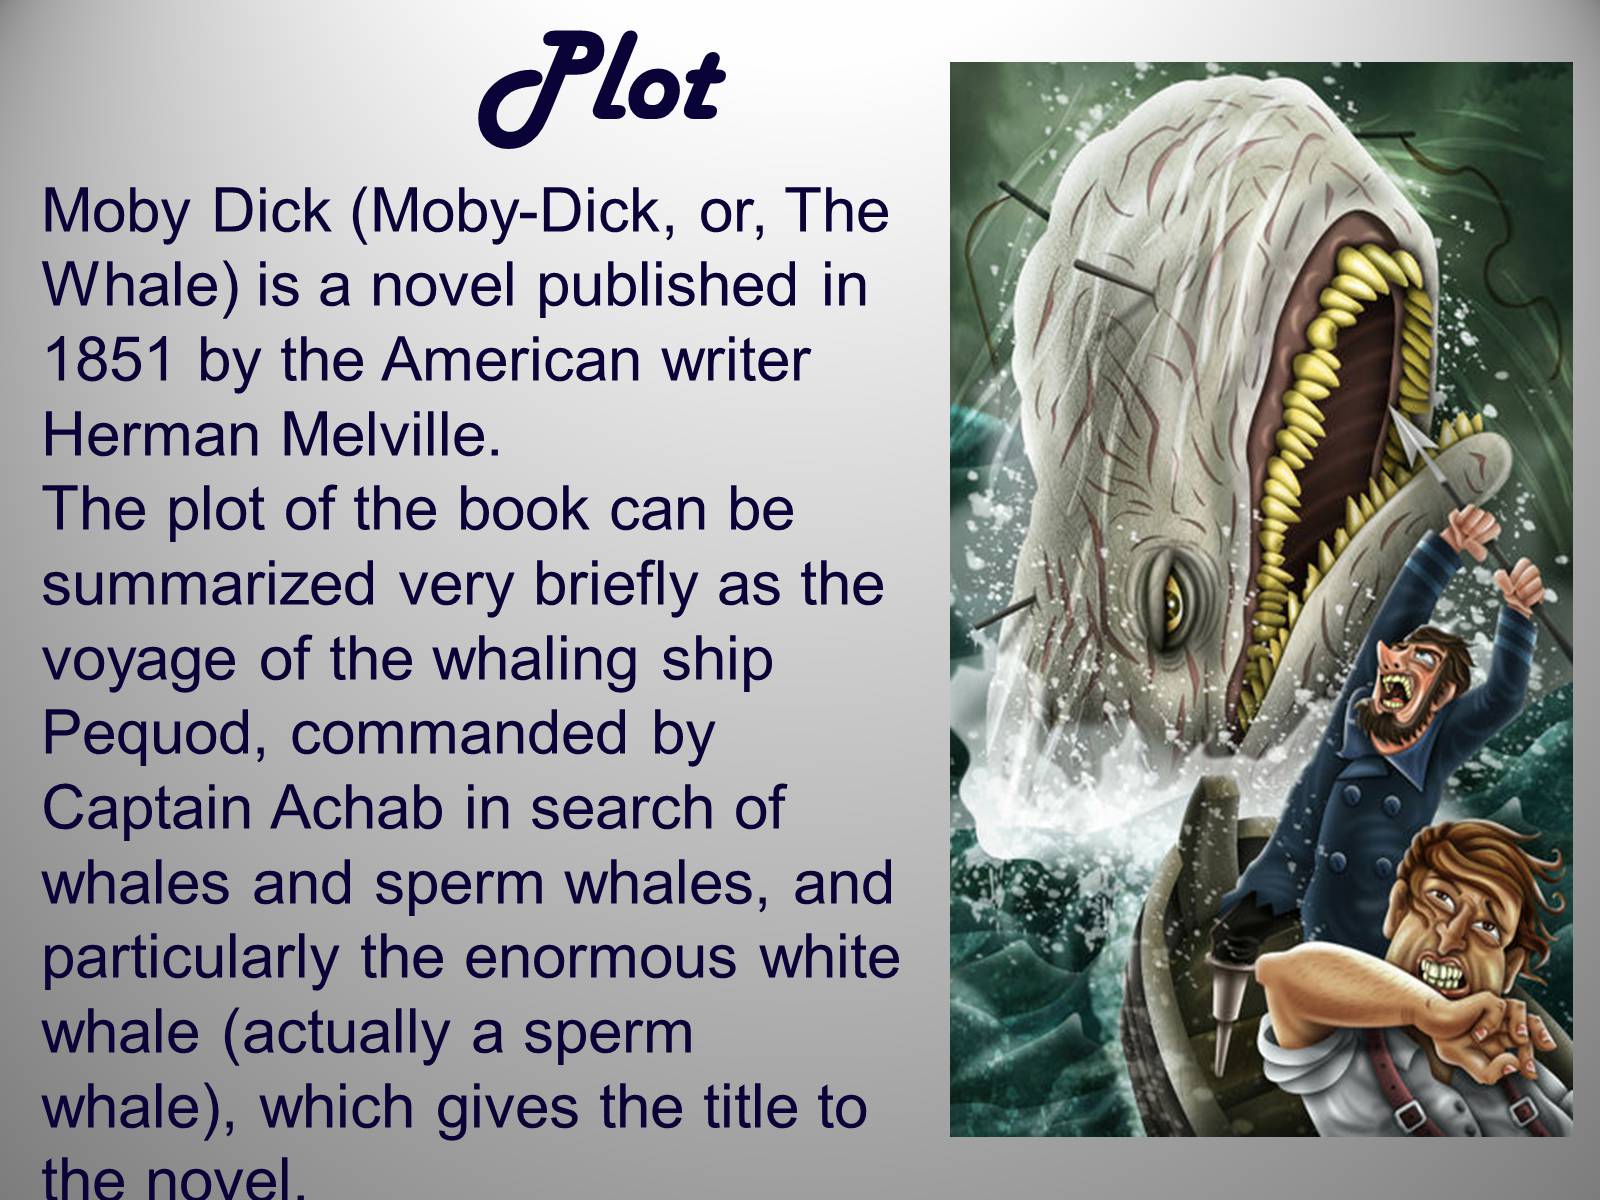 Moby dick or the wh herman melville 1851